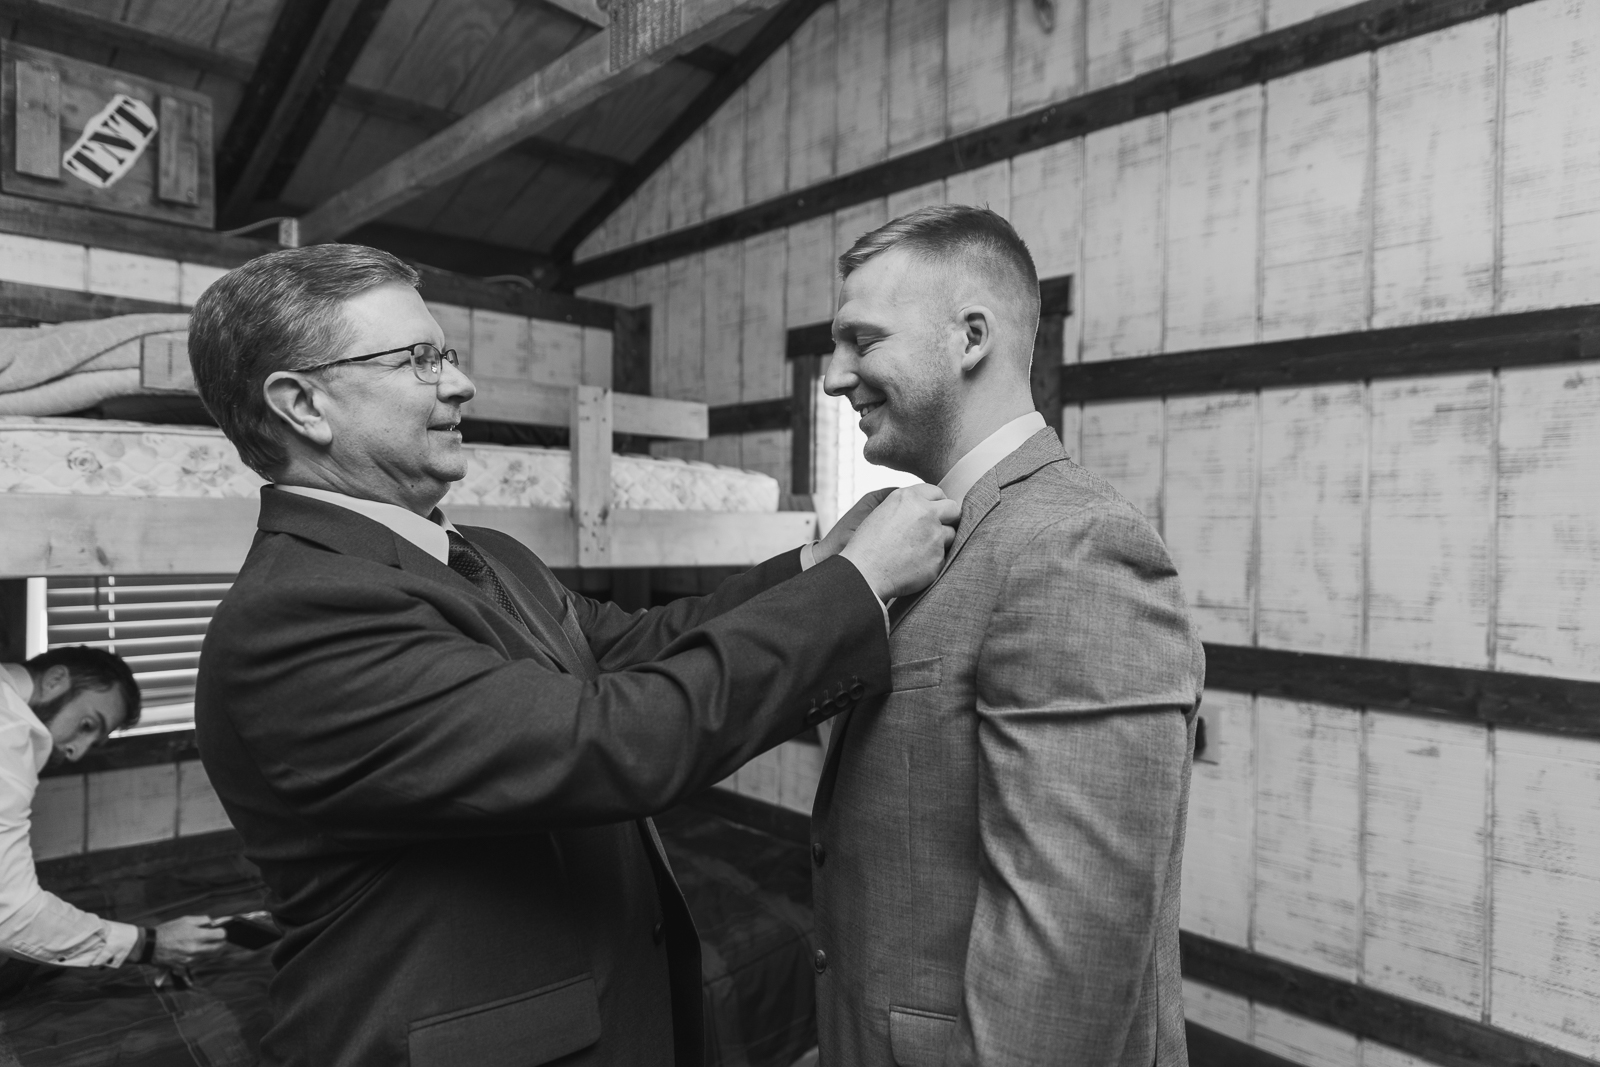 Groom with bride's father, getting ready, wedding preparation, tie, candid, fall wedding, rustic outdoor wedding ceremony at White Birch Barn